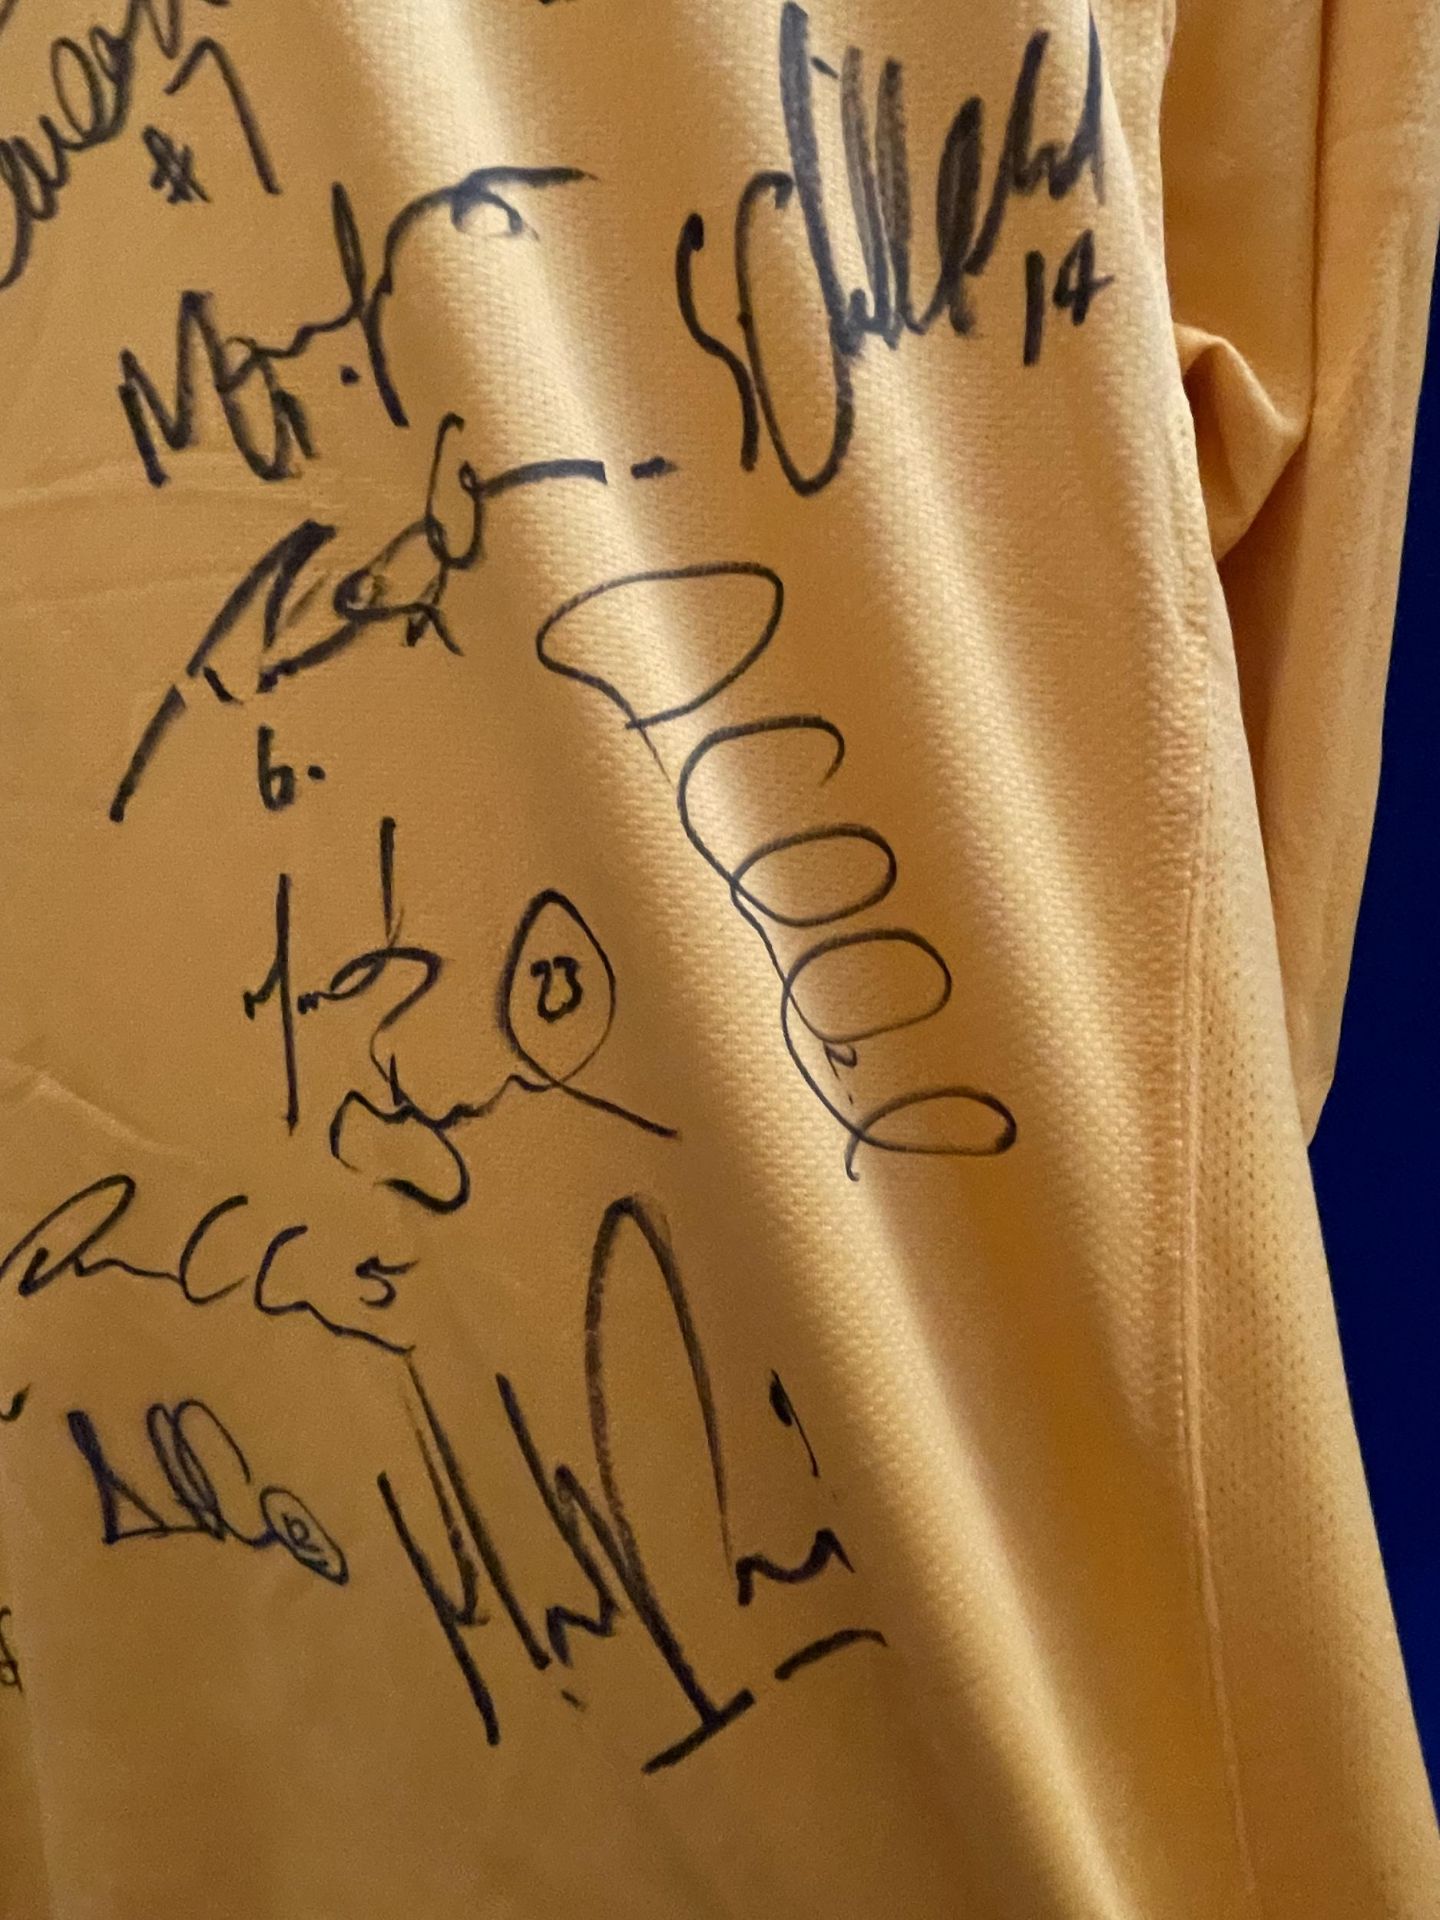 A SIGNED AUSTRALIAN FIFA 2006 WORLD CUP, GERMANY SHIRT - Image 5 of 7